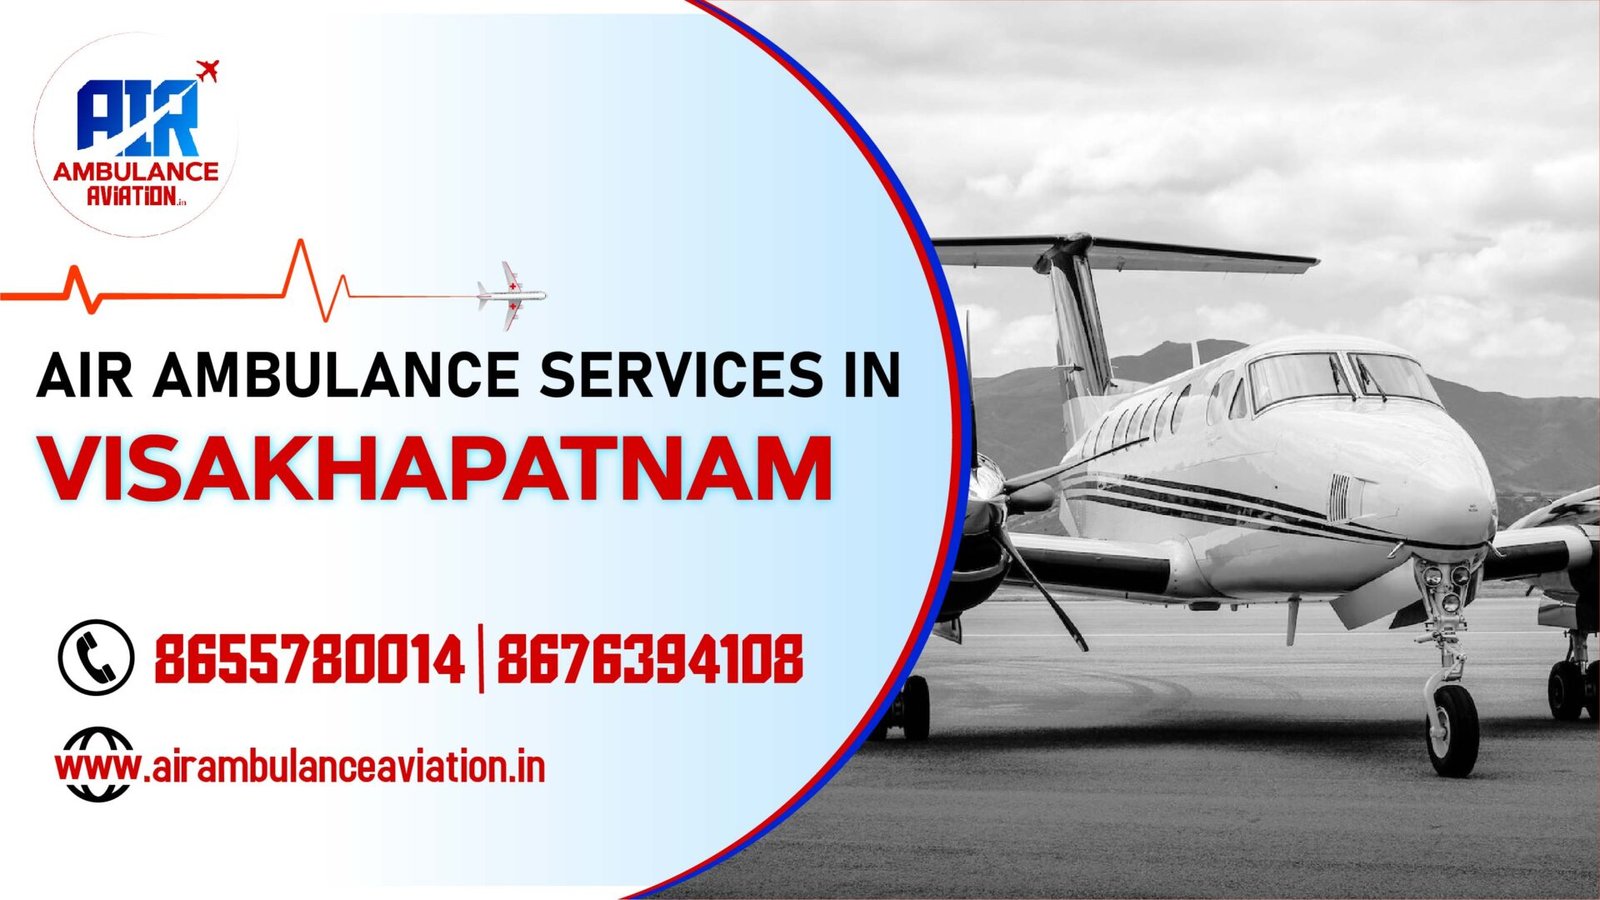 Air Ambulance Services in Visakhapatnam